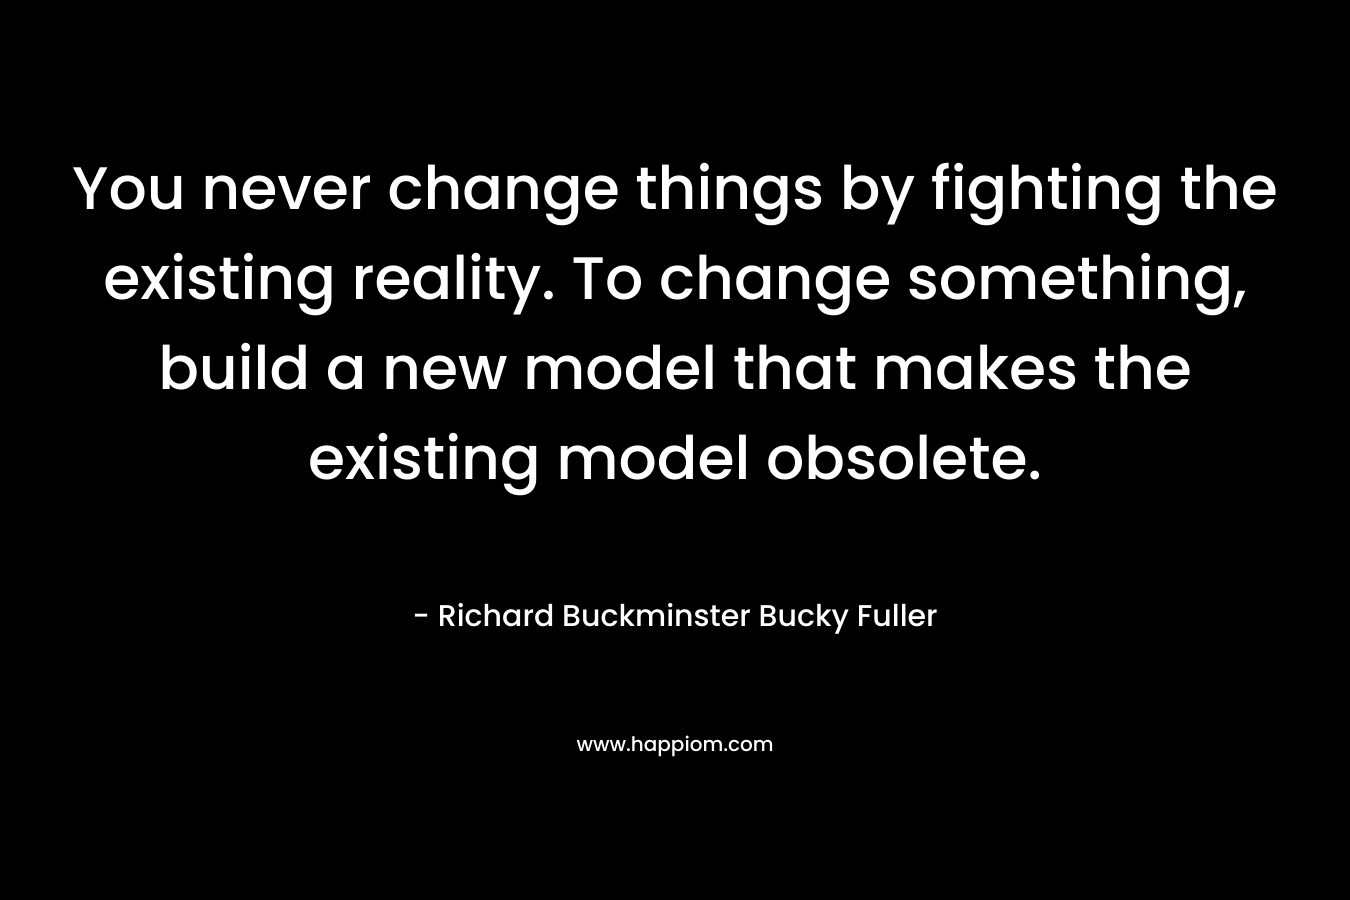 You never change things by fighting the existing reality. To change something, build a new model that makes the existing model obsolete. – Richard Buckminster Bucky Fuller